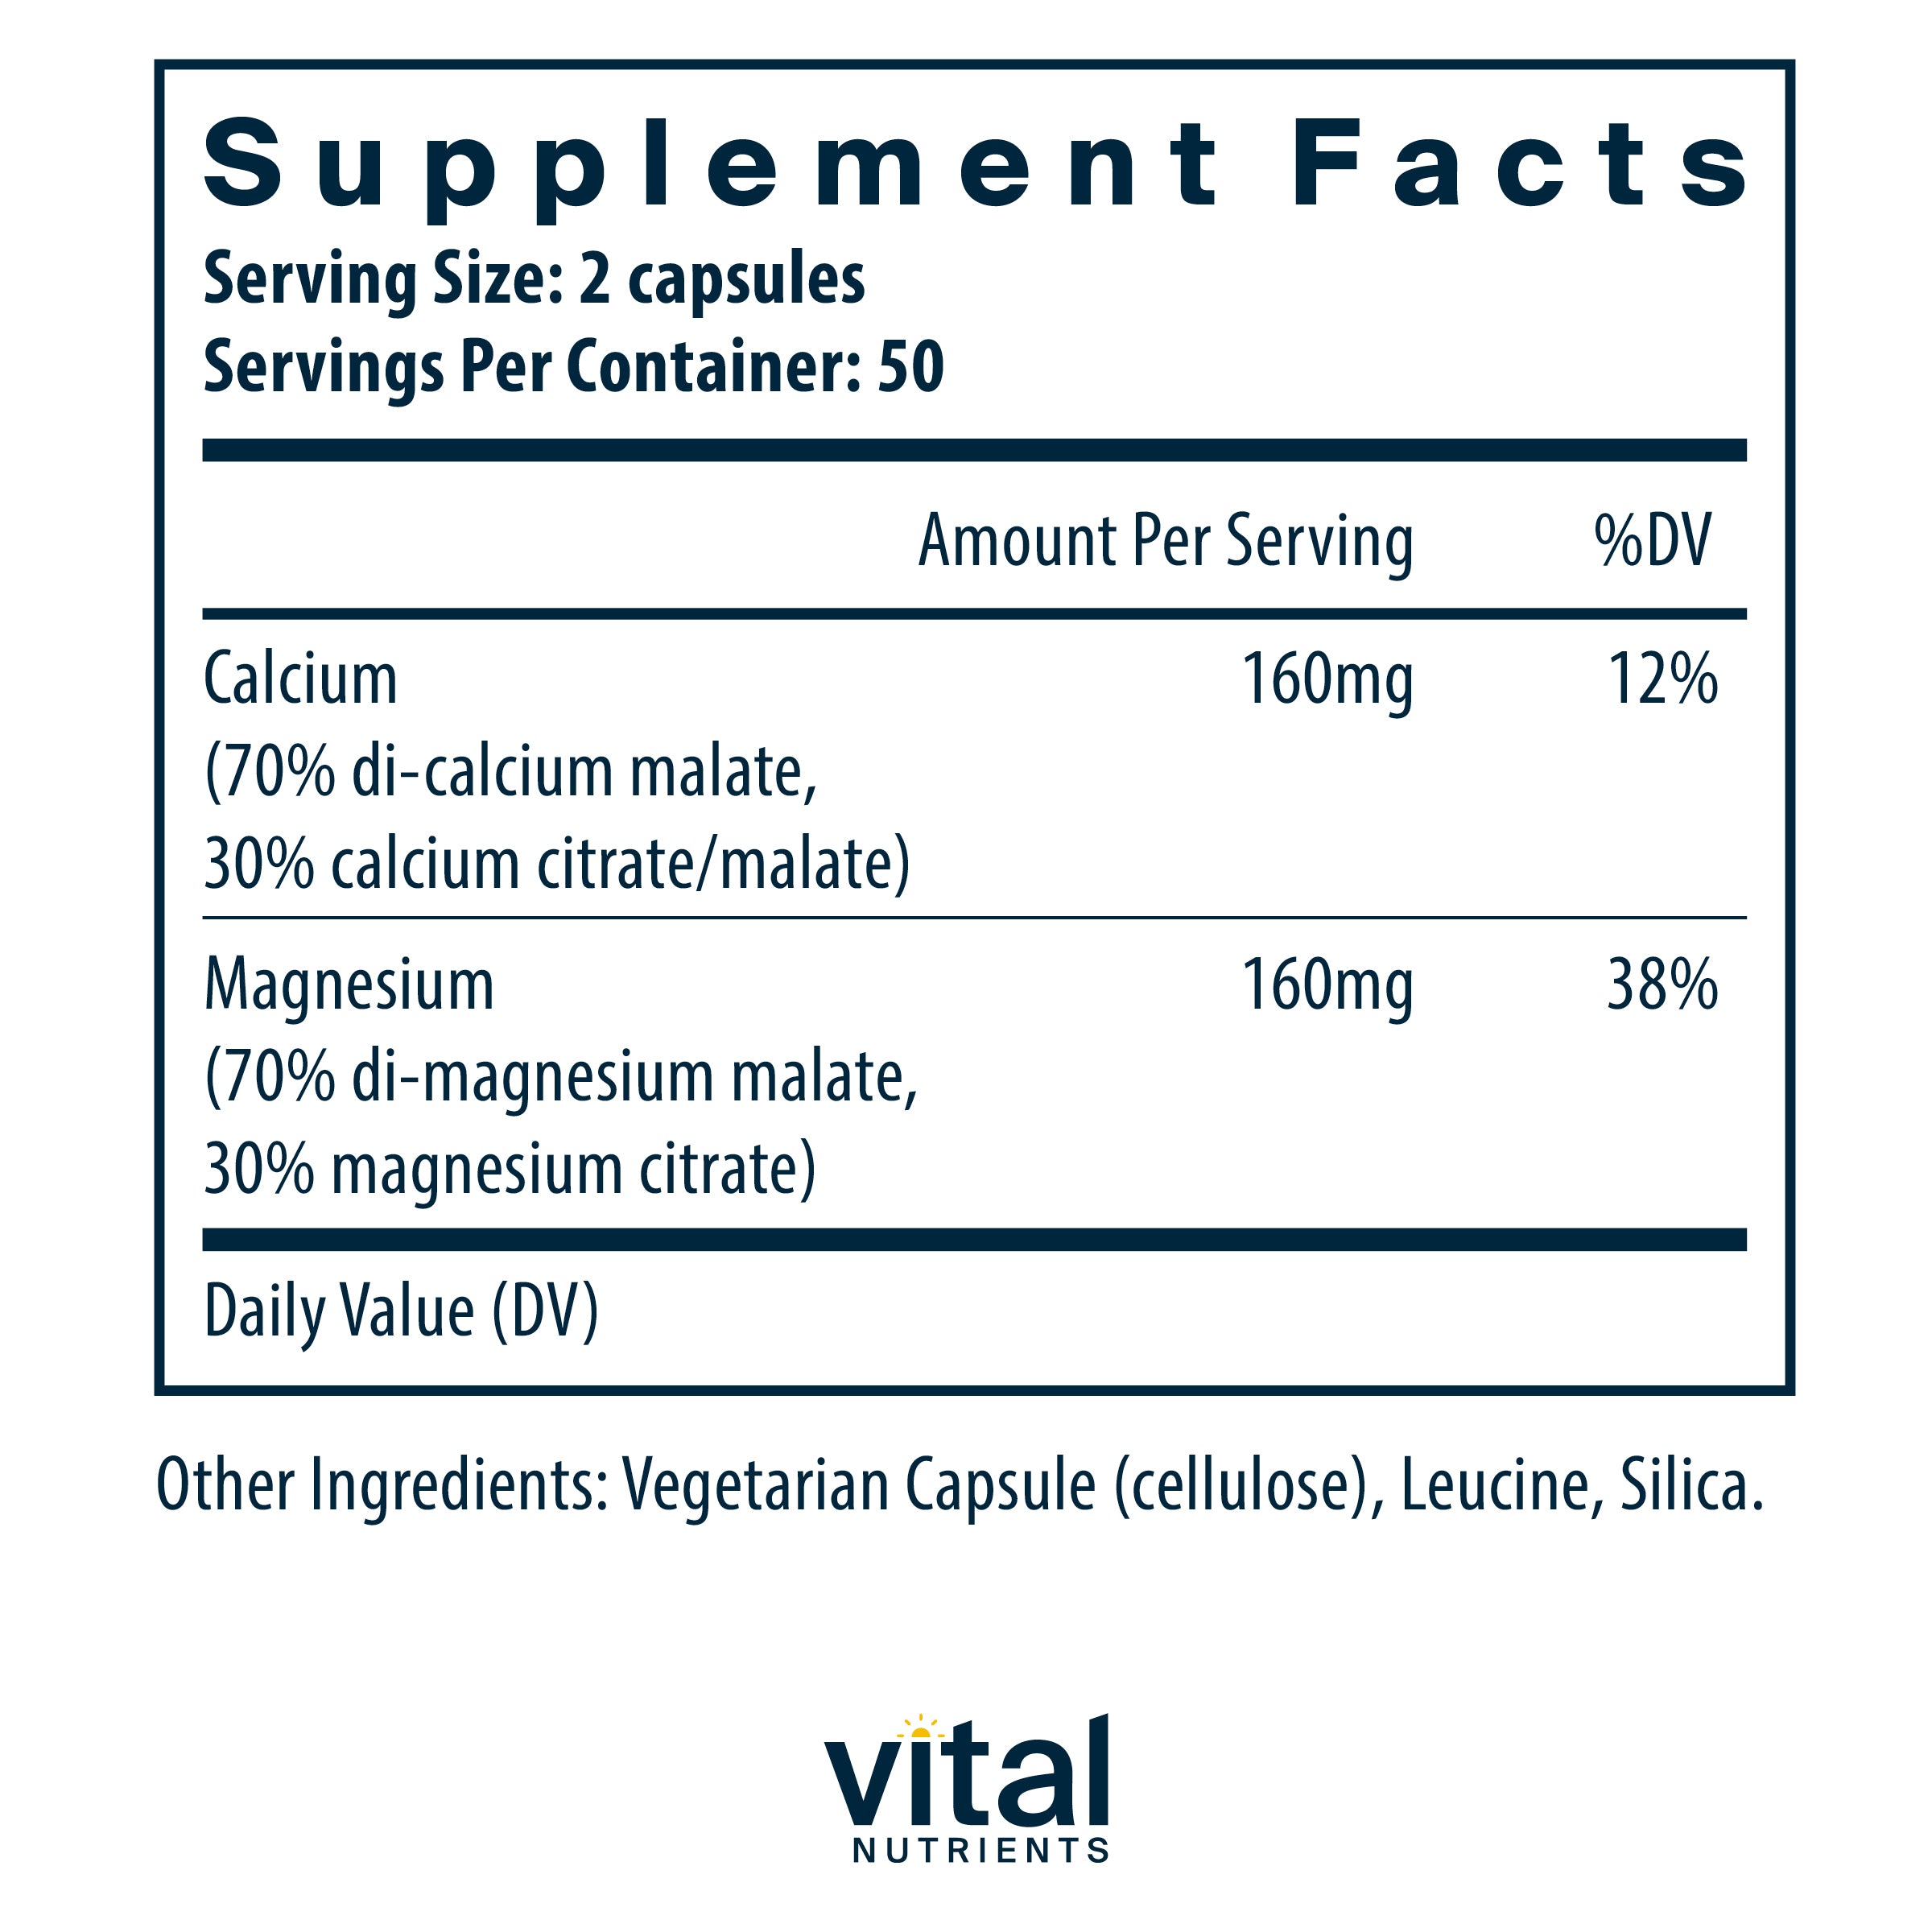 Vital Nutrients Supplement Facts Image for Calcium Magnesium Citrate/Malate 